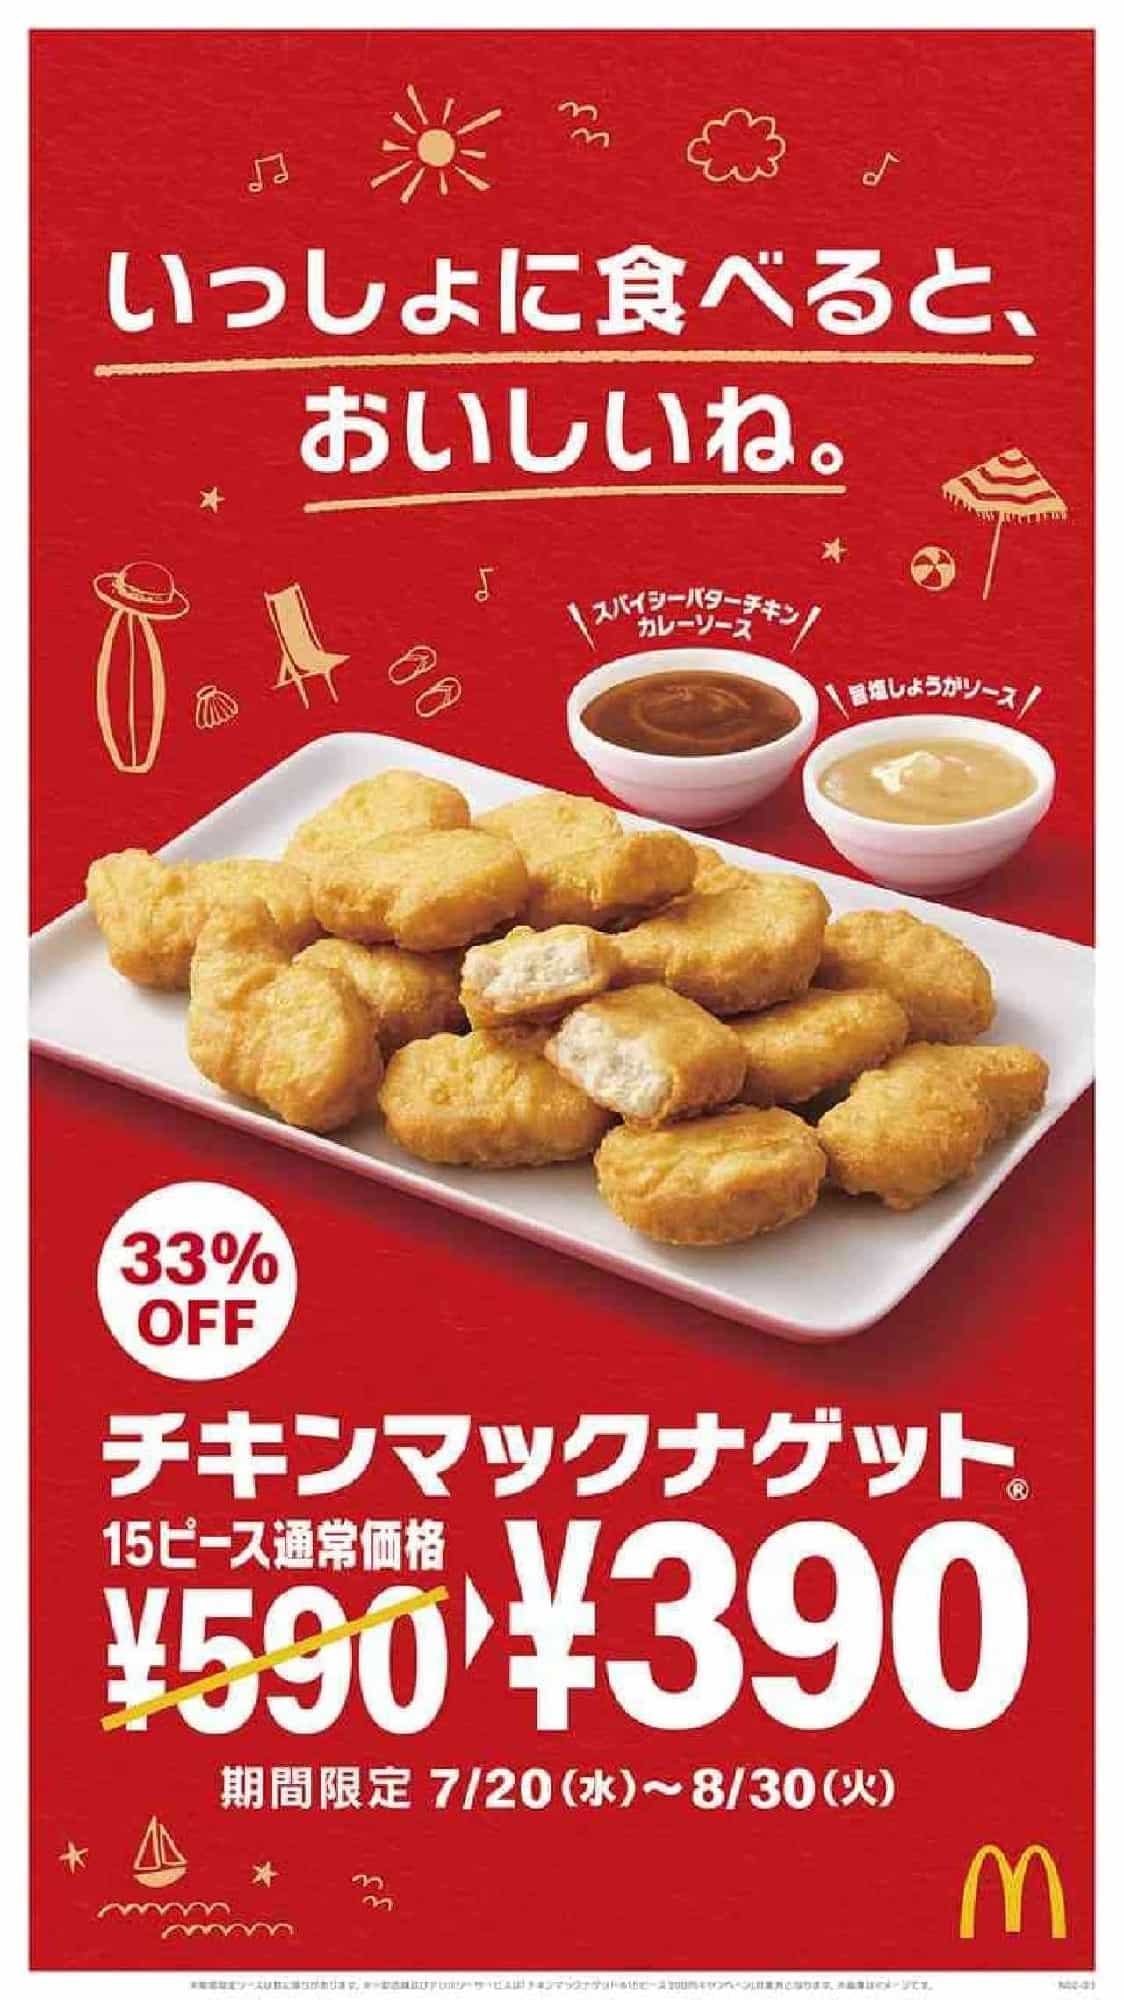 McDonald's "Chicken McNuggets 15 Piece with 3 Sauce" 33% OFF